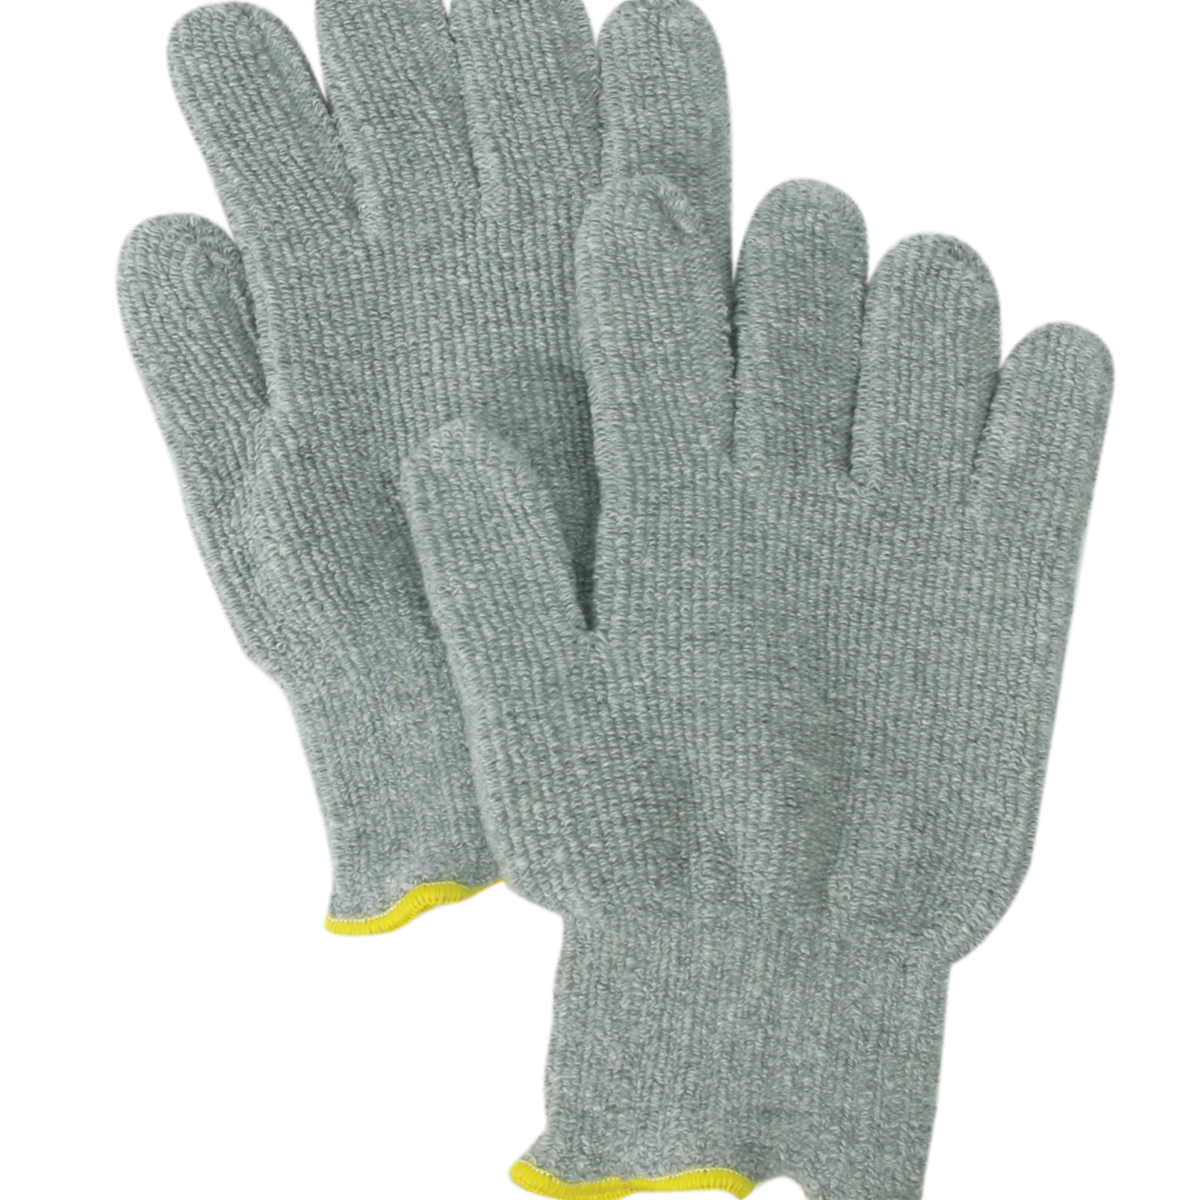 Honeywell Loop-out Ladies Natural/Gray Cotton Heat Resistant Gloves With Straight Cuff